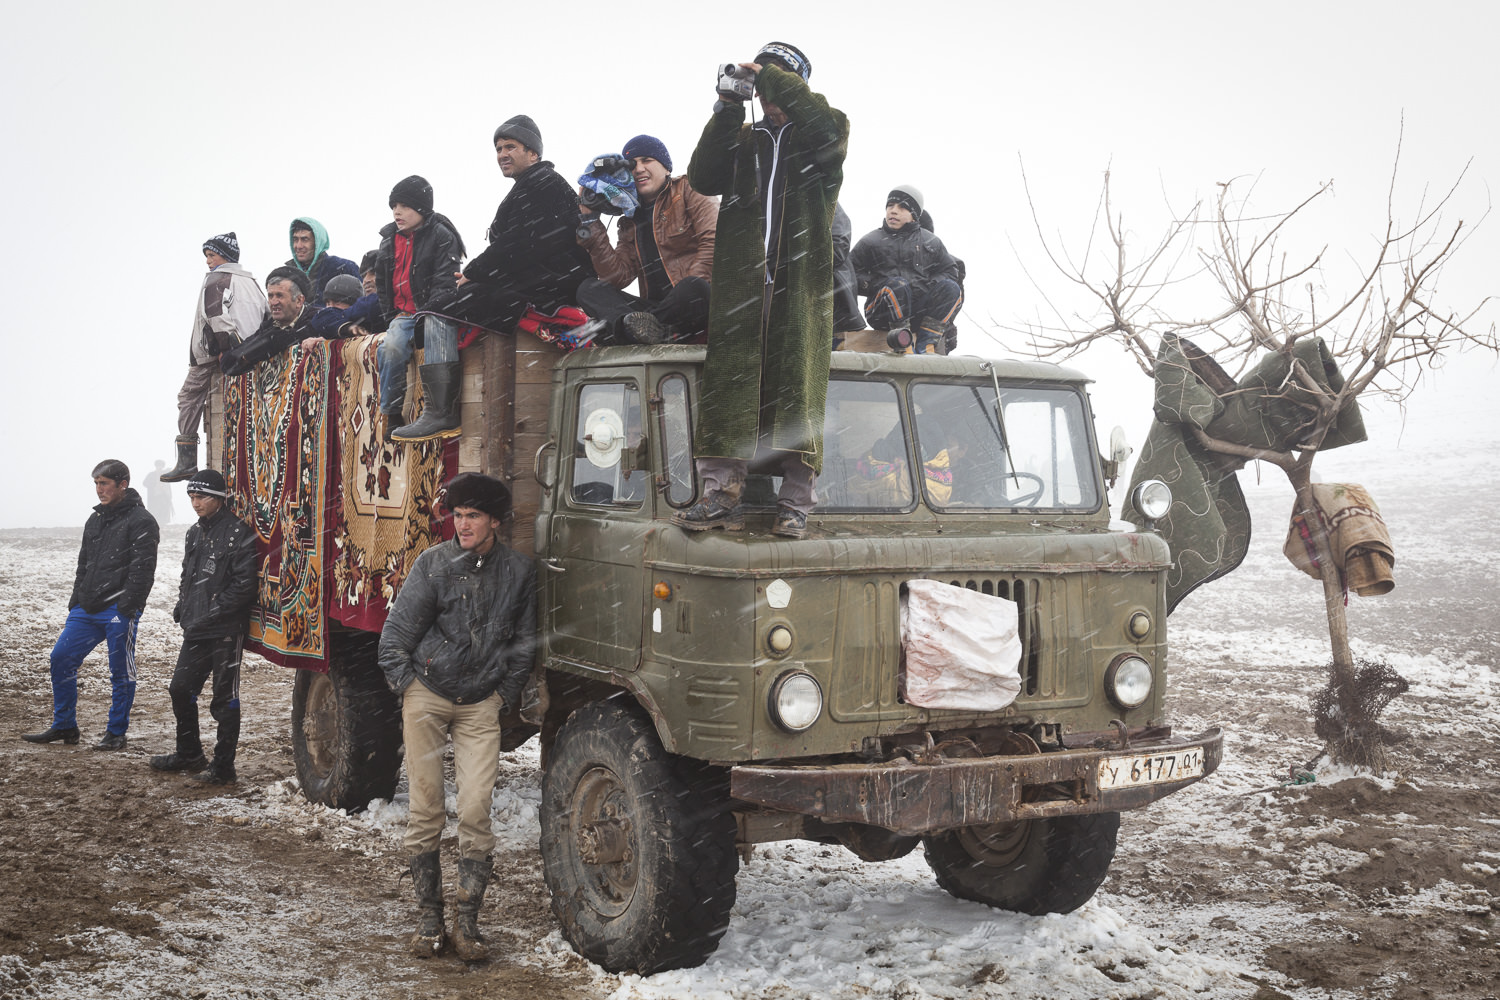  Buzkashi fans cluster around a truck holding competition prizes. 